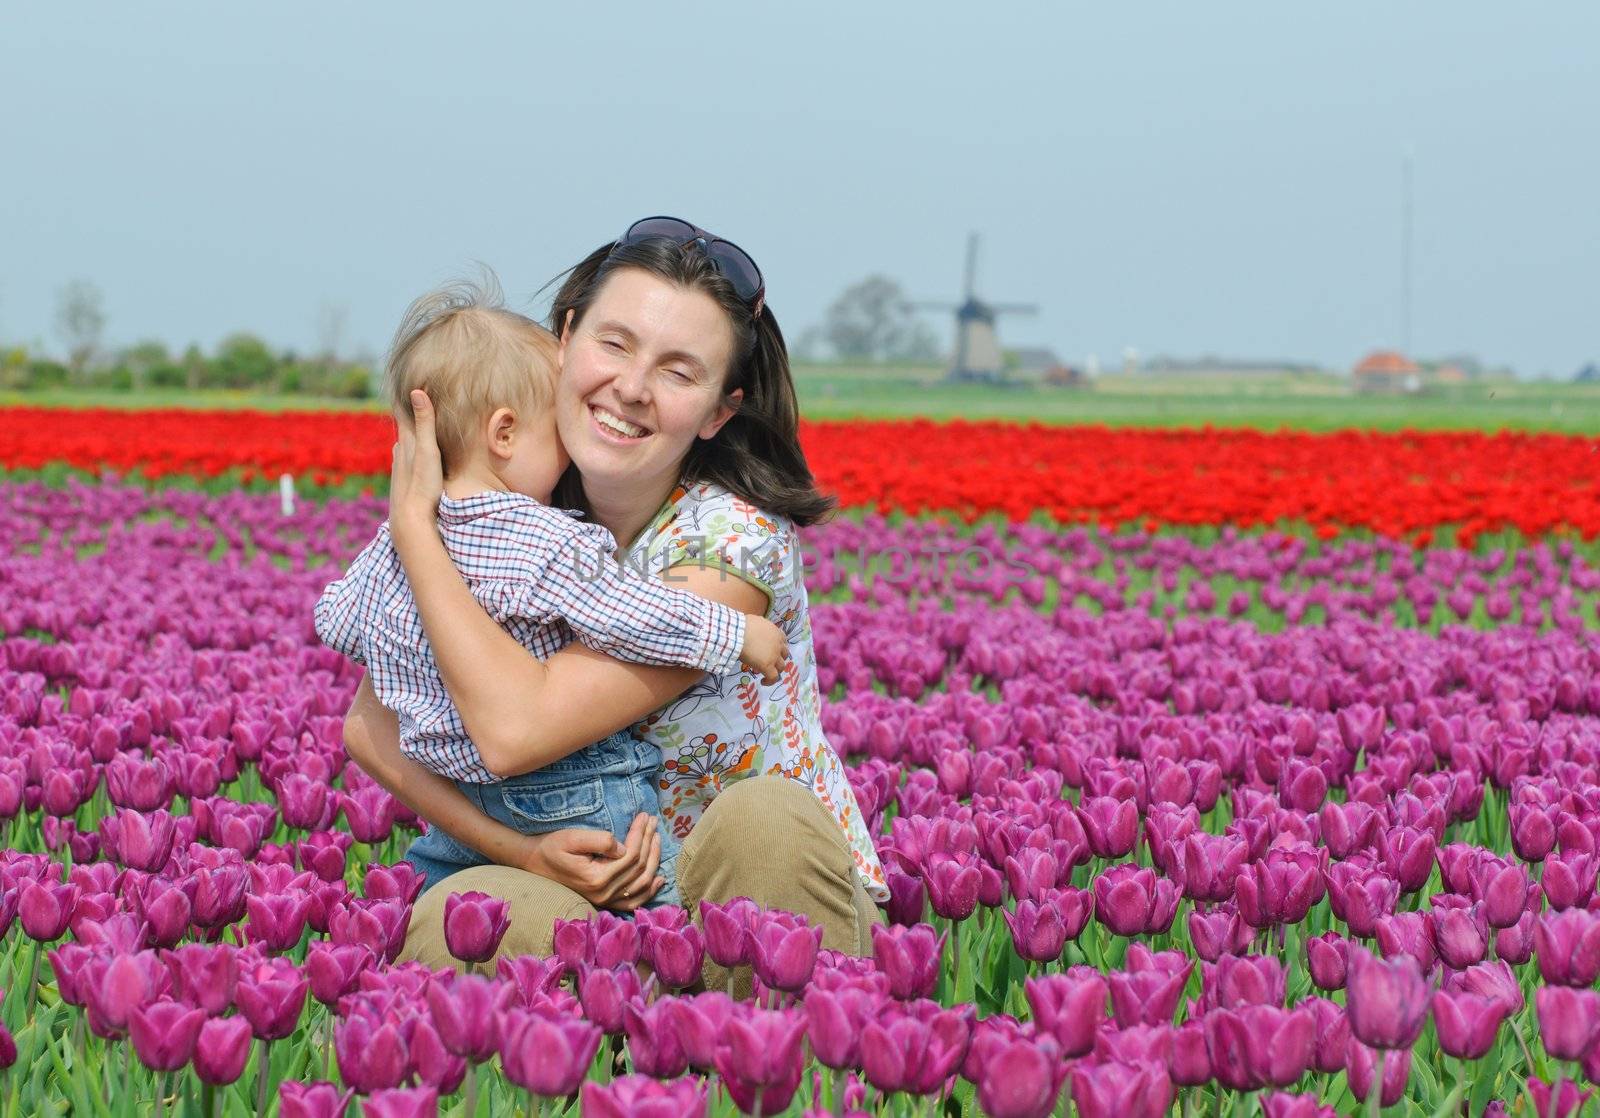 In Tulip Field. Mother with son in tulips field by maxoliki